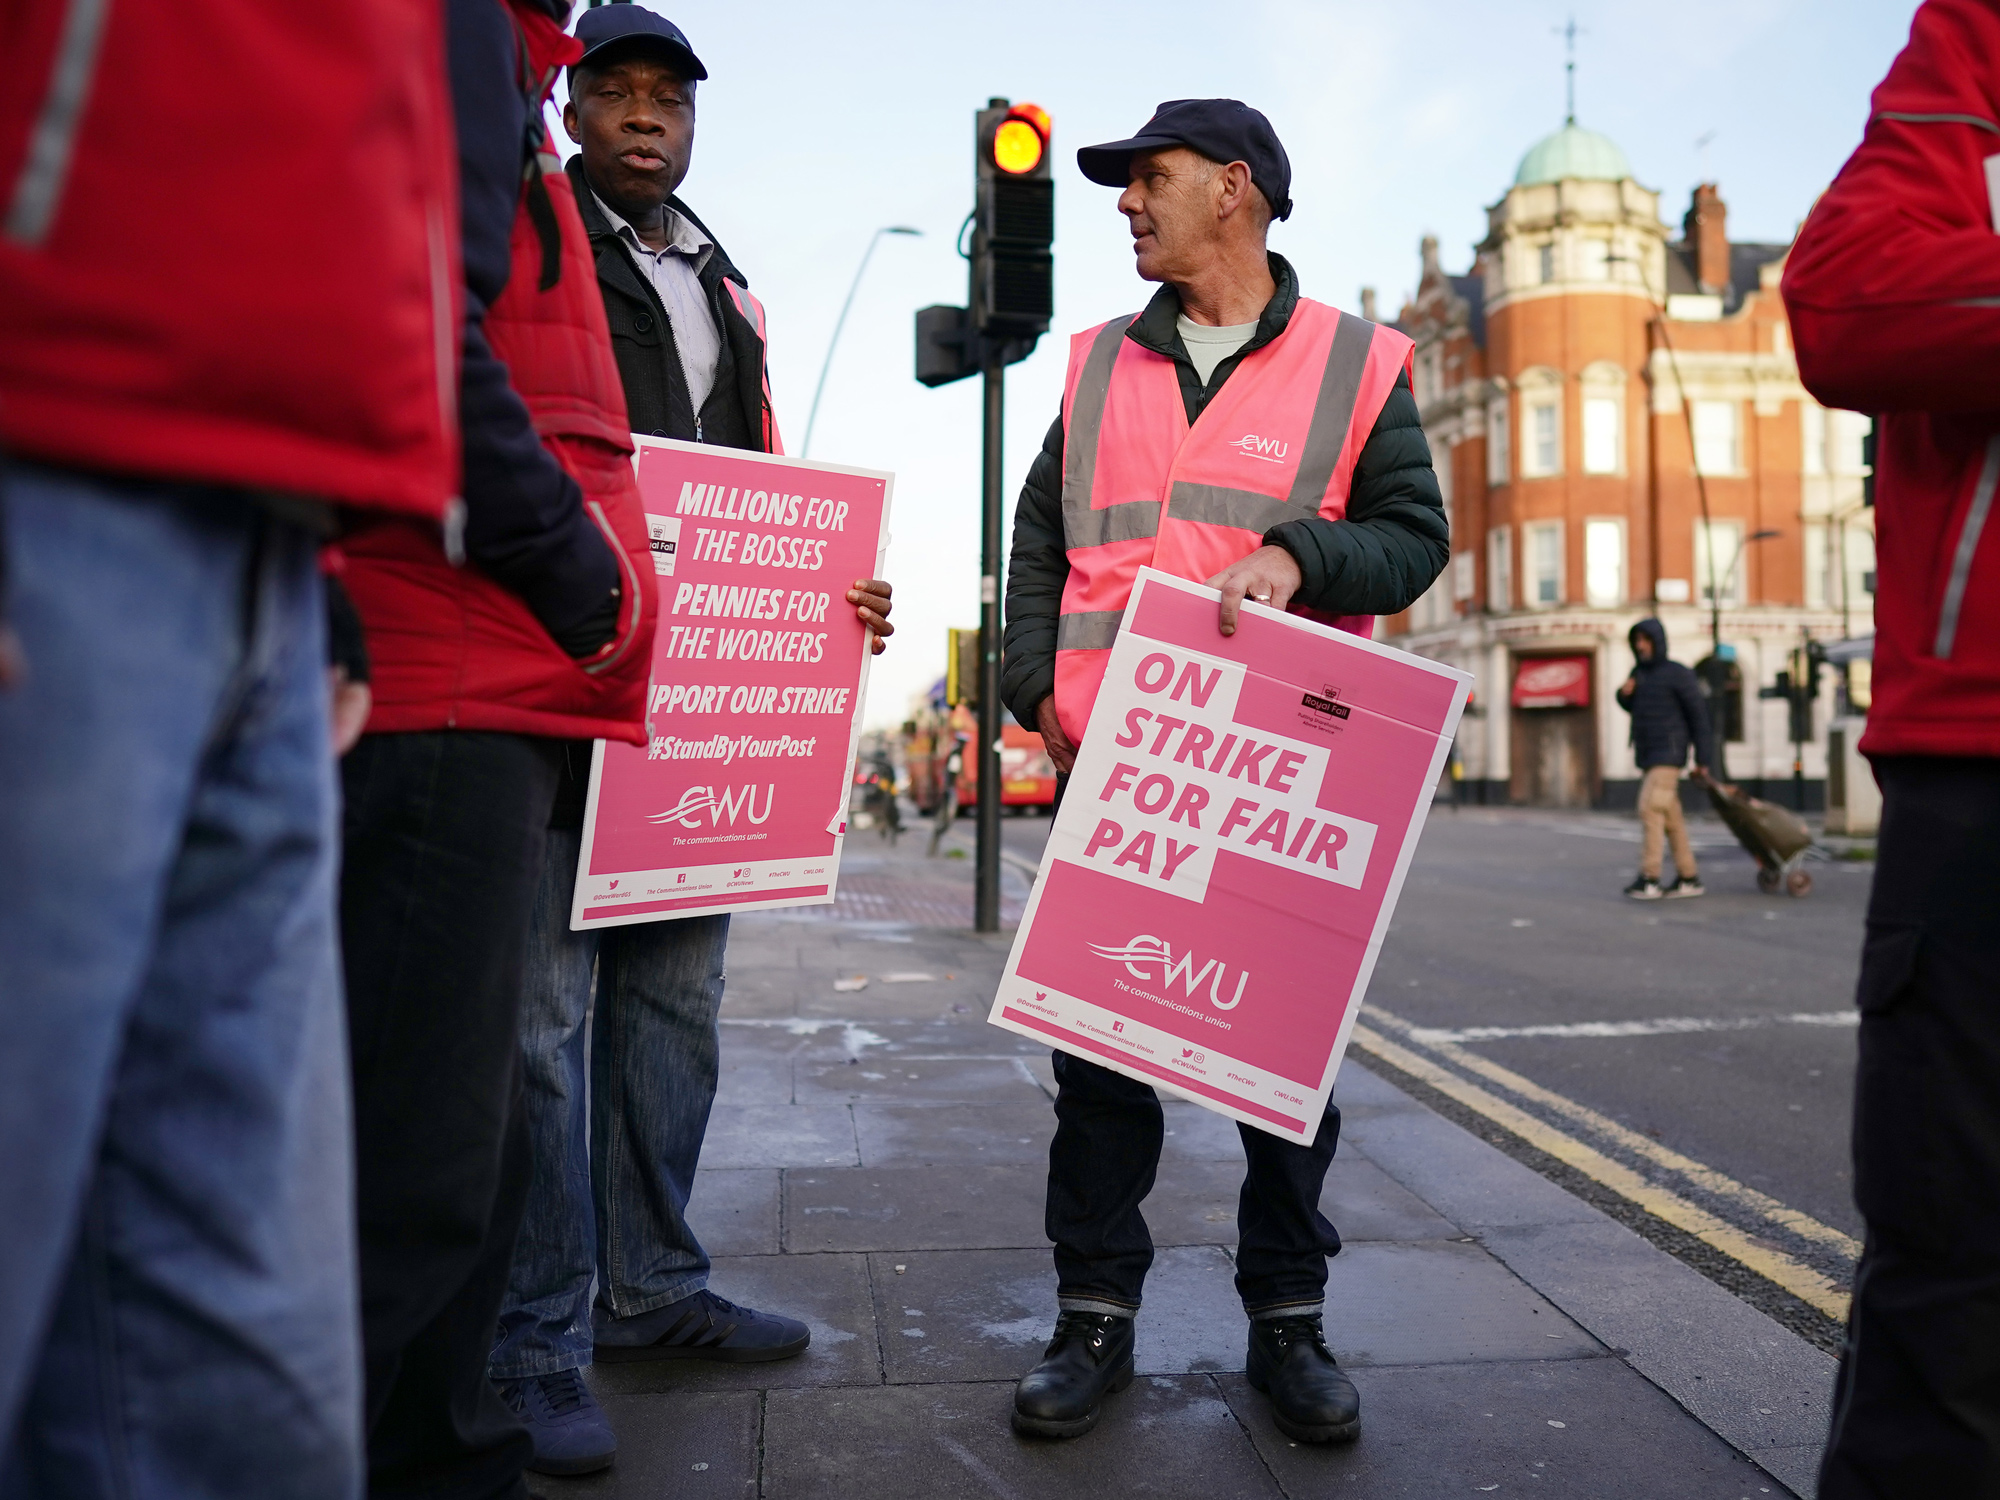 Postal workers on a picket line at Kilburn Delivery Office in London on Nov. 24.